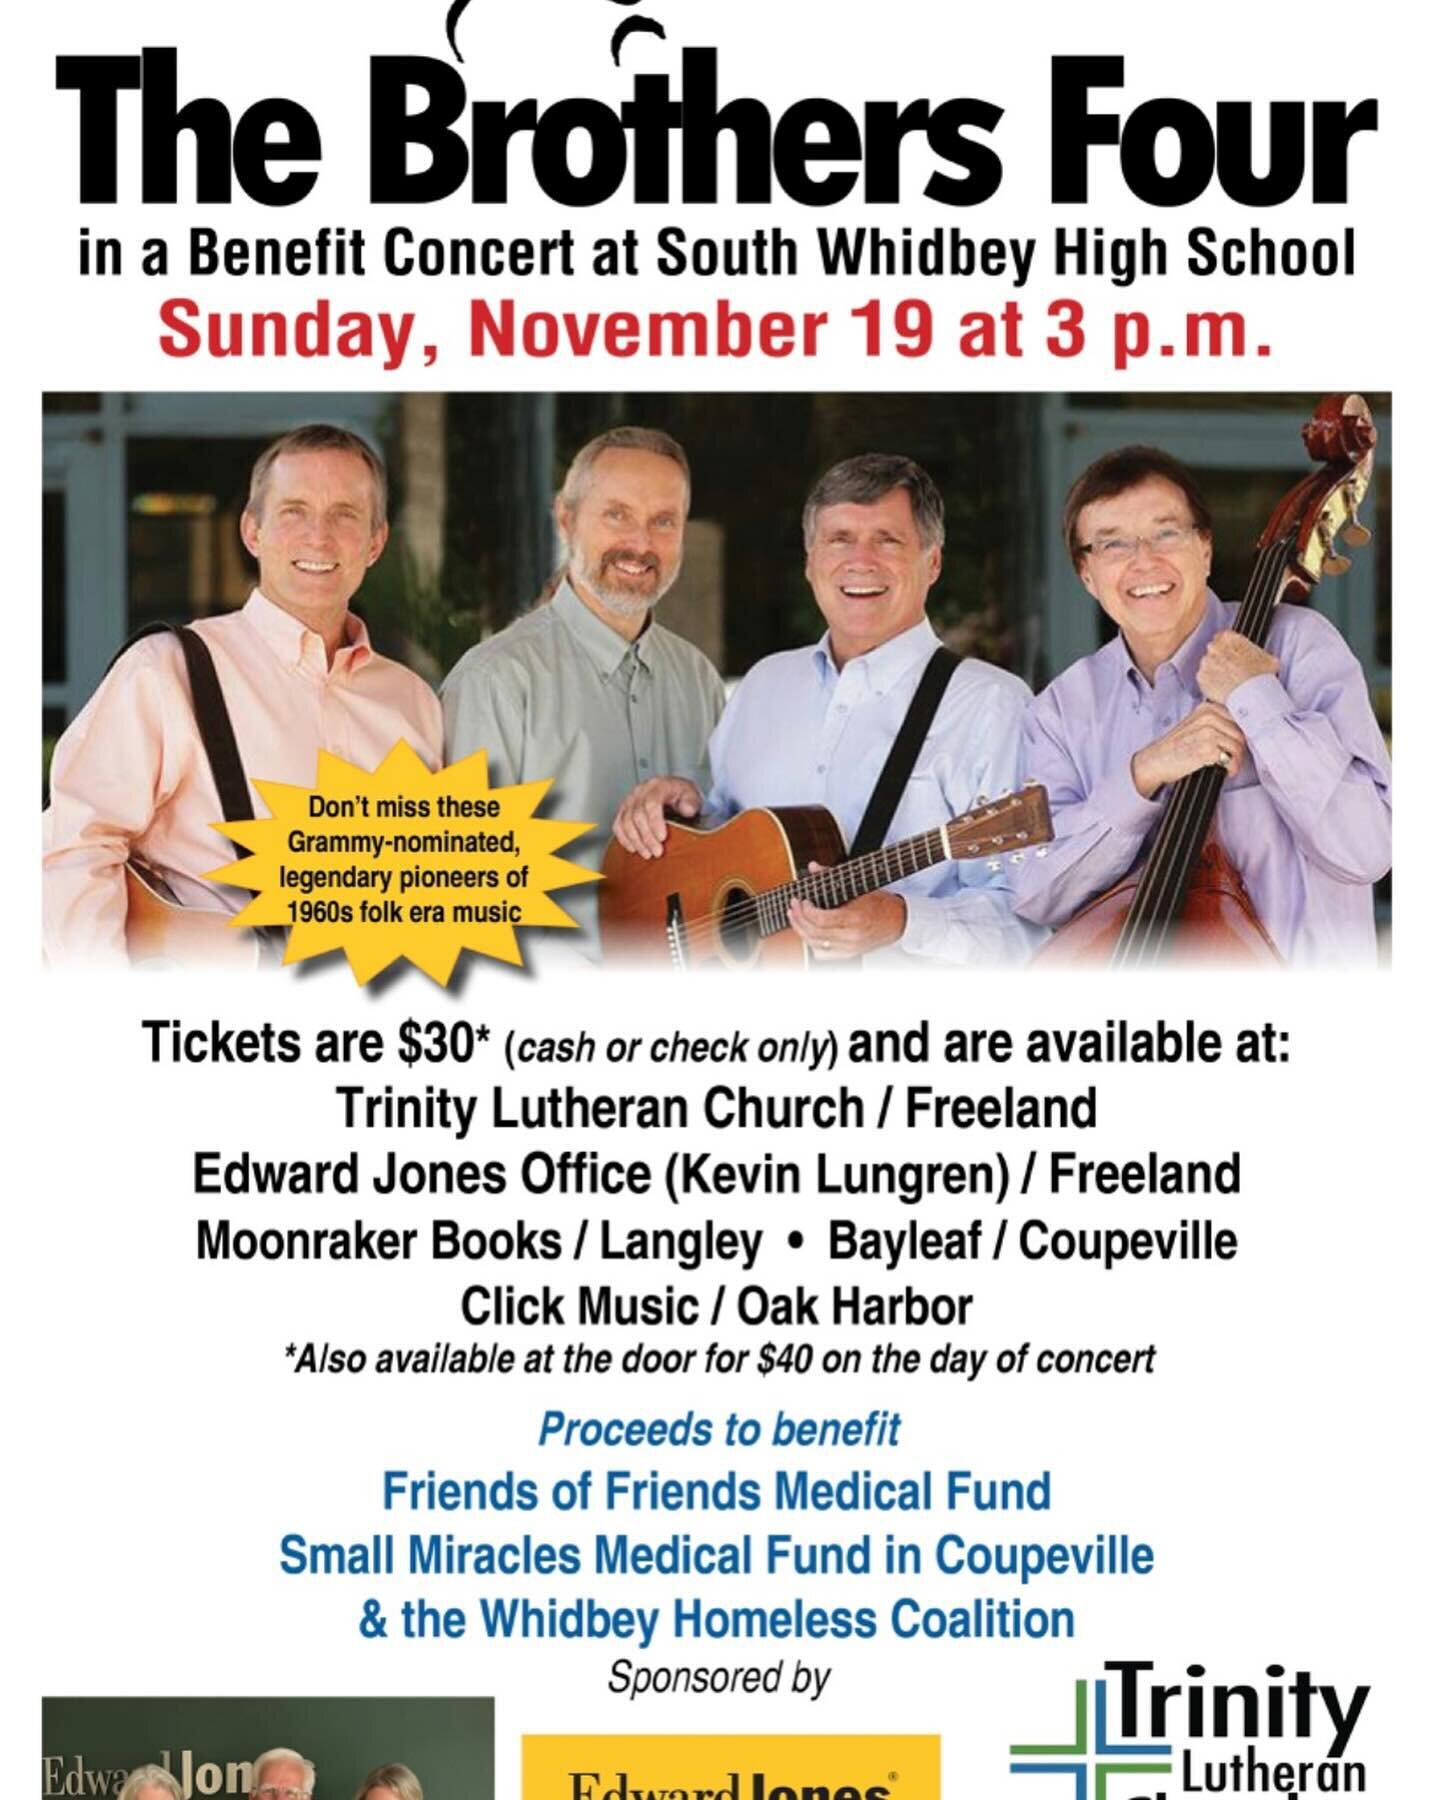 Brothers Four Concert tickets are still available! Benefit for Friends of Friends Medical Support Fund, Small Miracles and Whidbey Homeless Coalition.